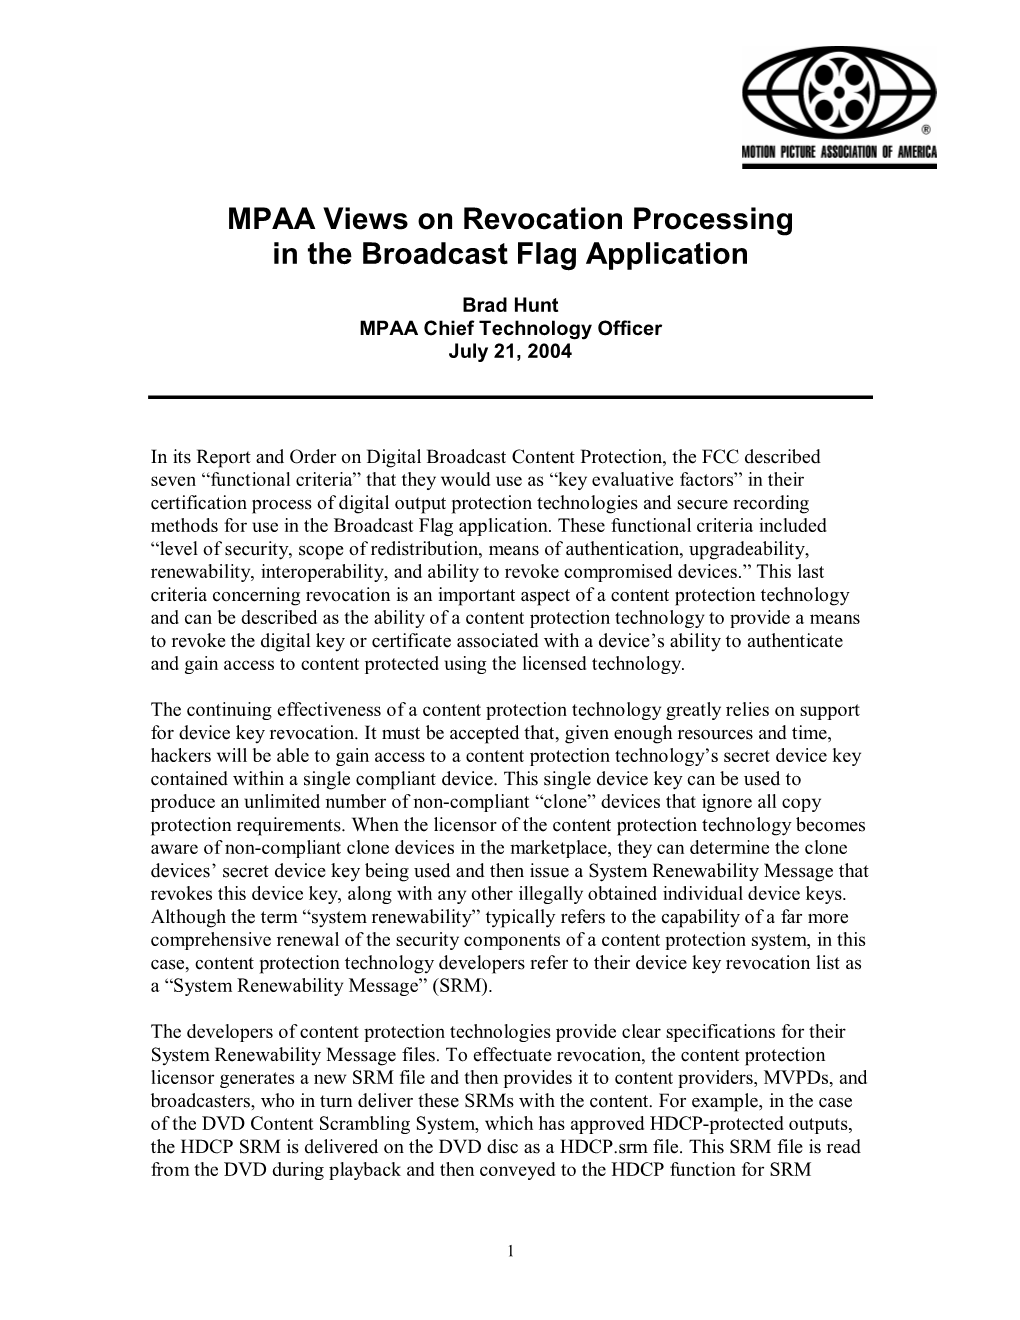 MPAA Views on Revocation Processing in the Broadcast Flag Application